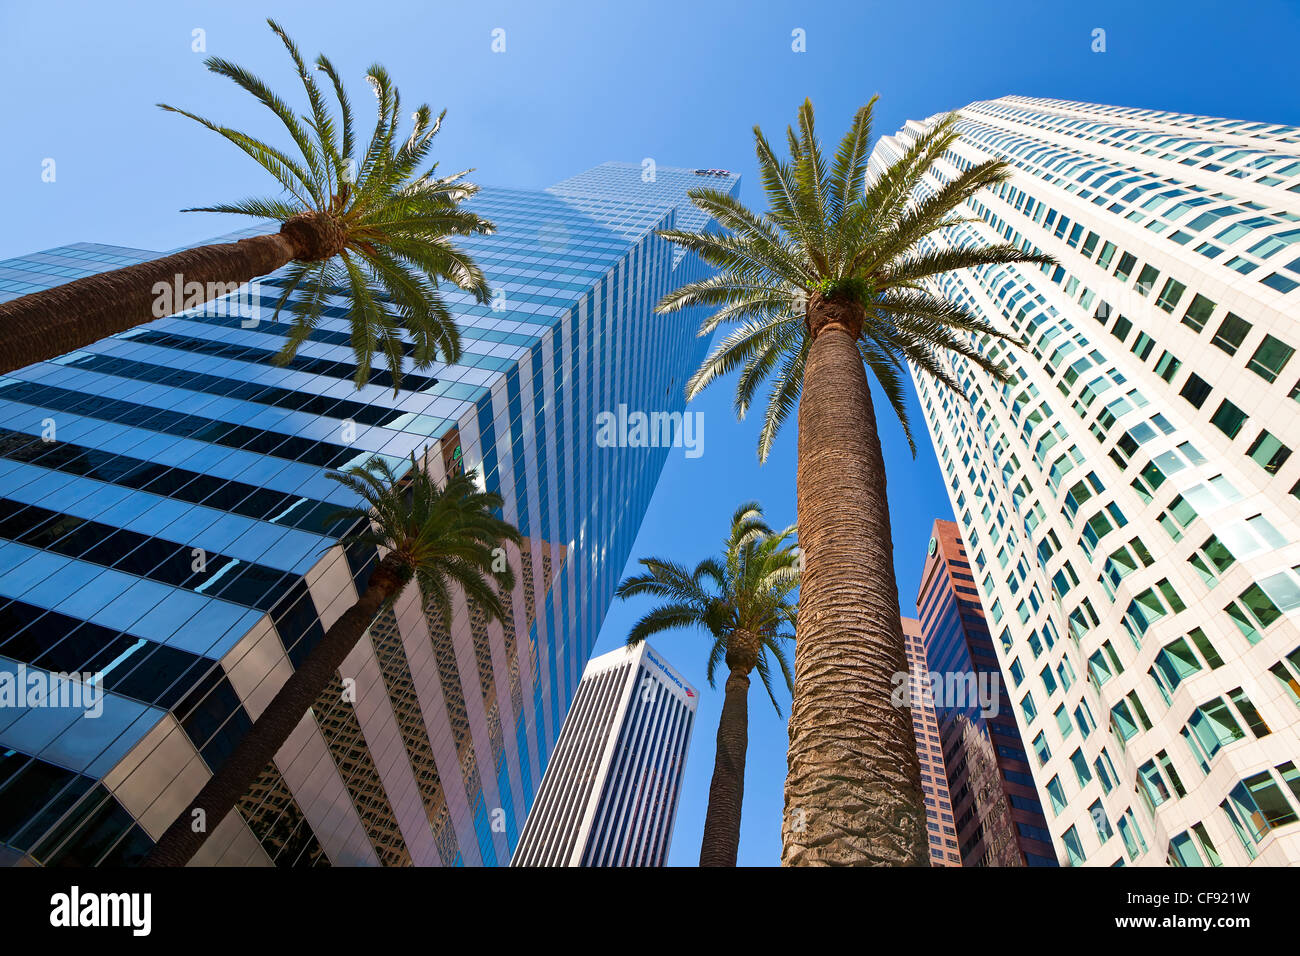 United States, California, Los Angeles, Downtown Stock Photo